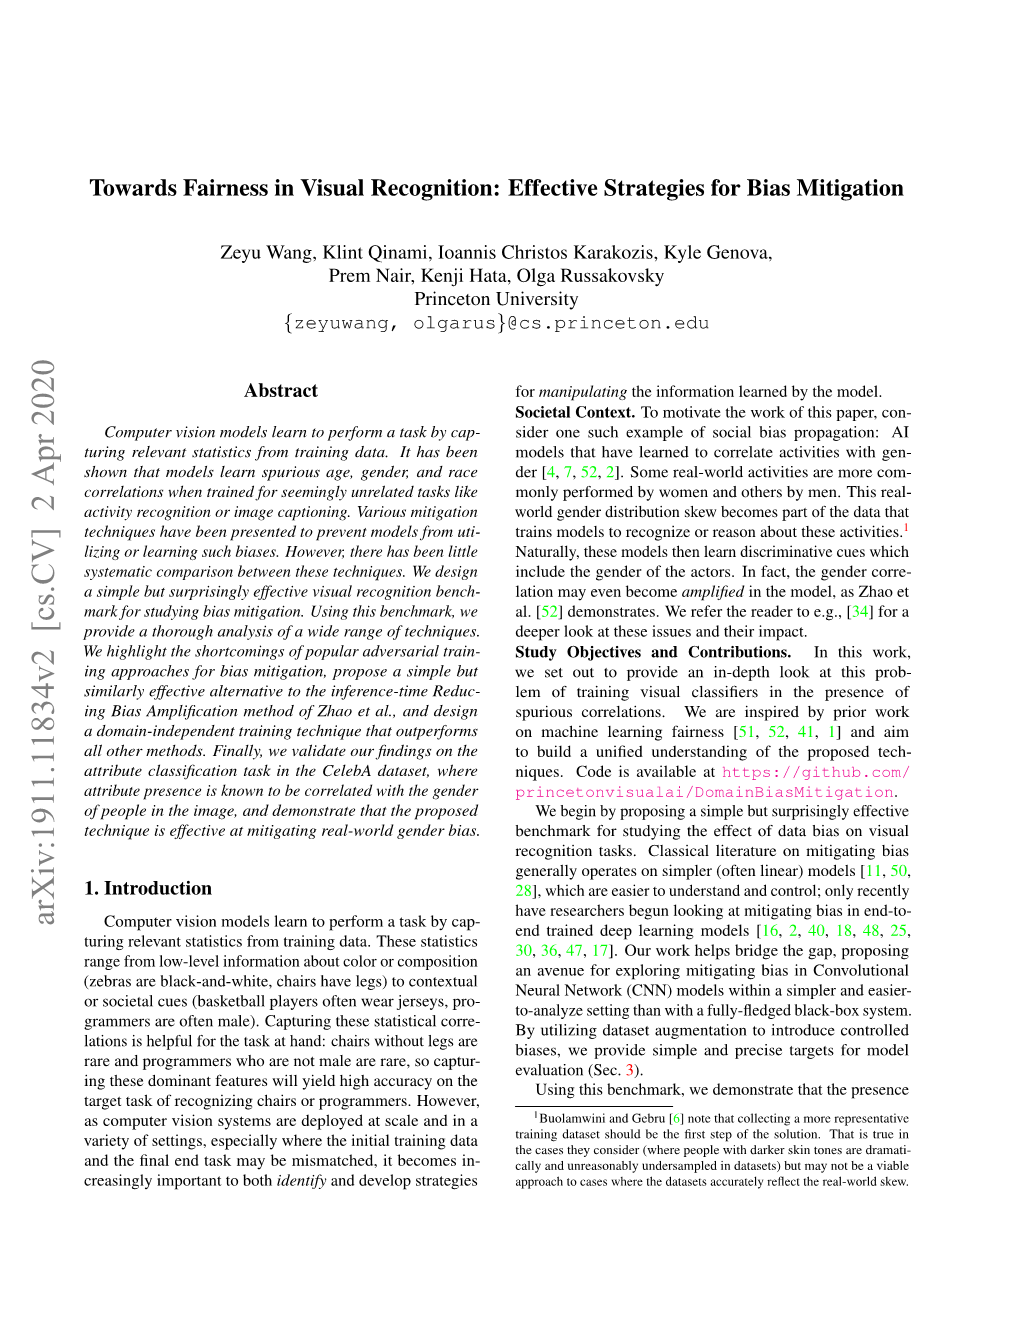 Towards Fairness in Visual Recognition: Effective Strategies for Bias Mitigation